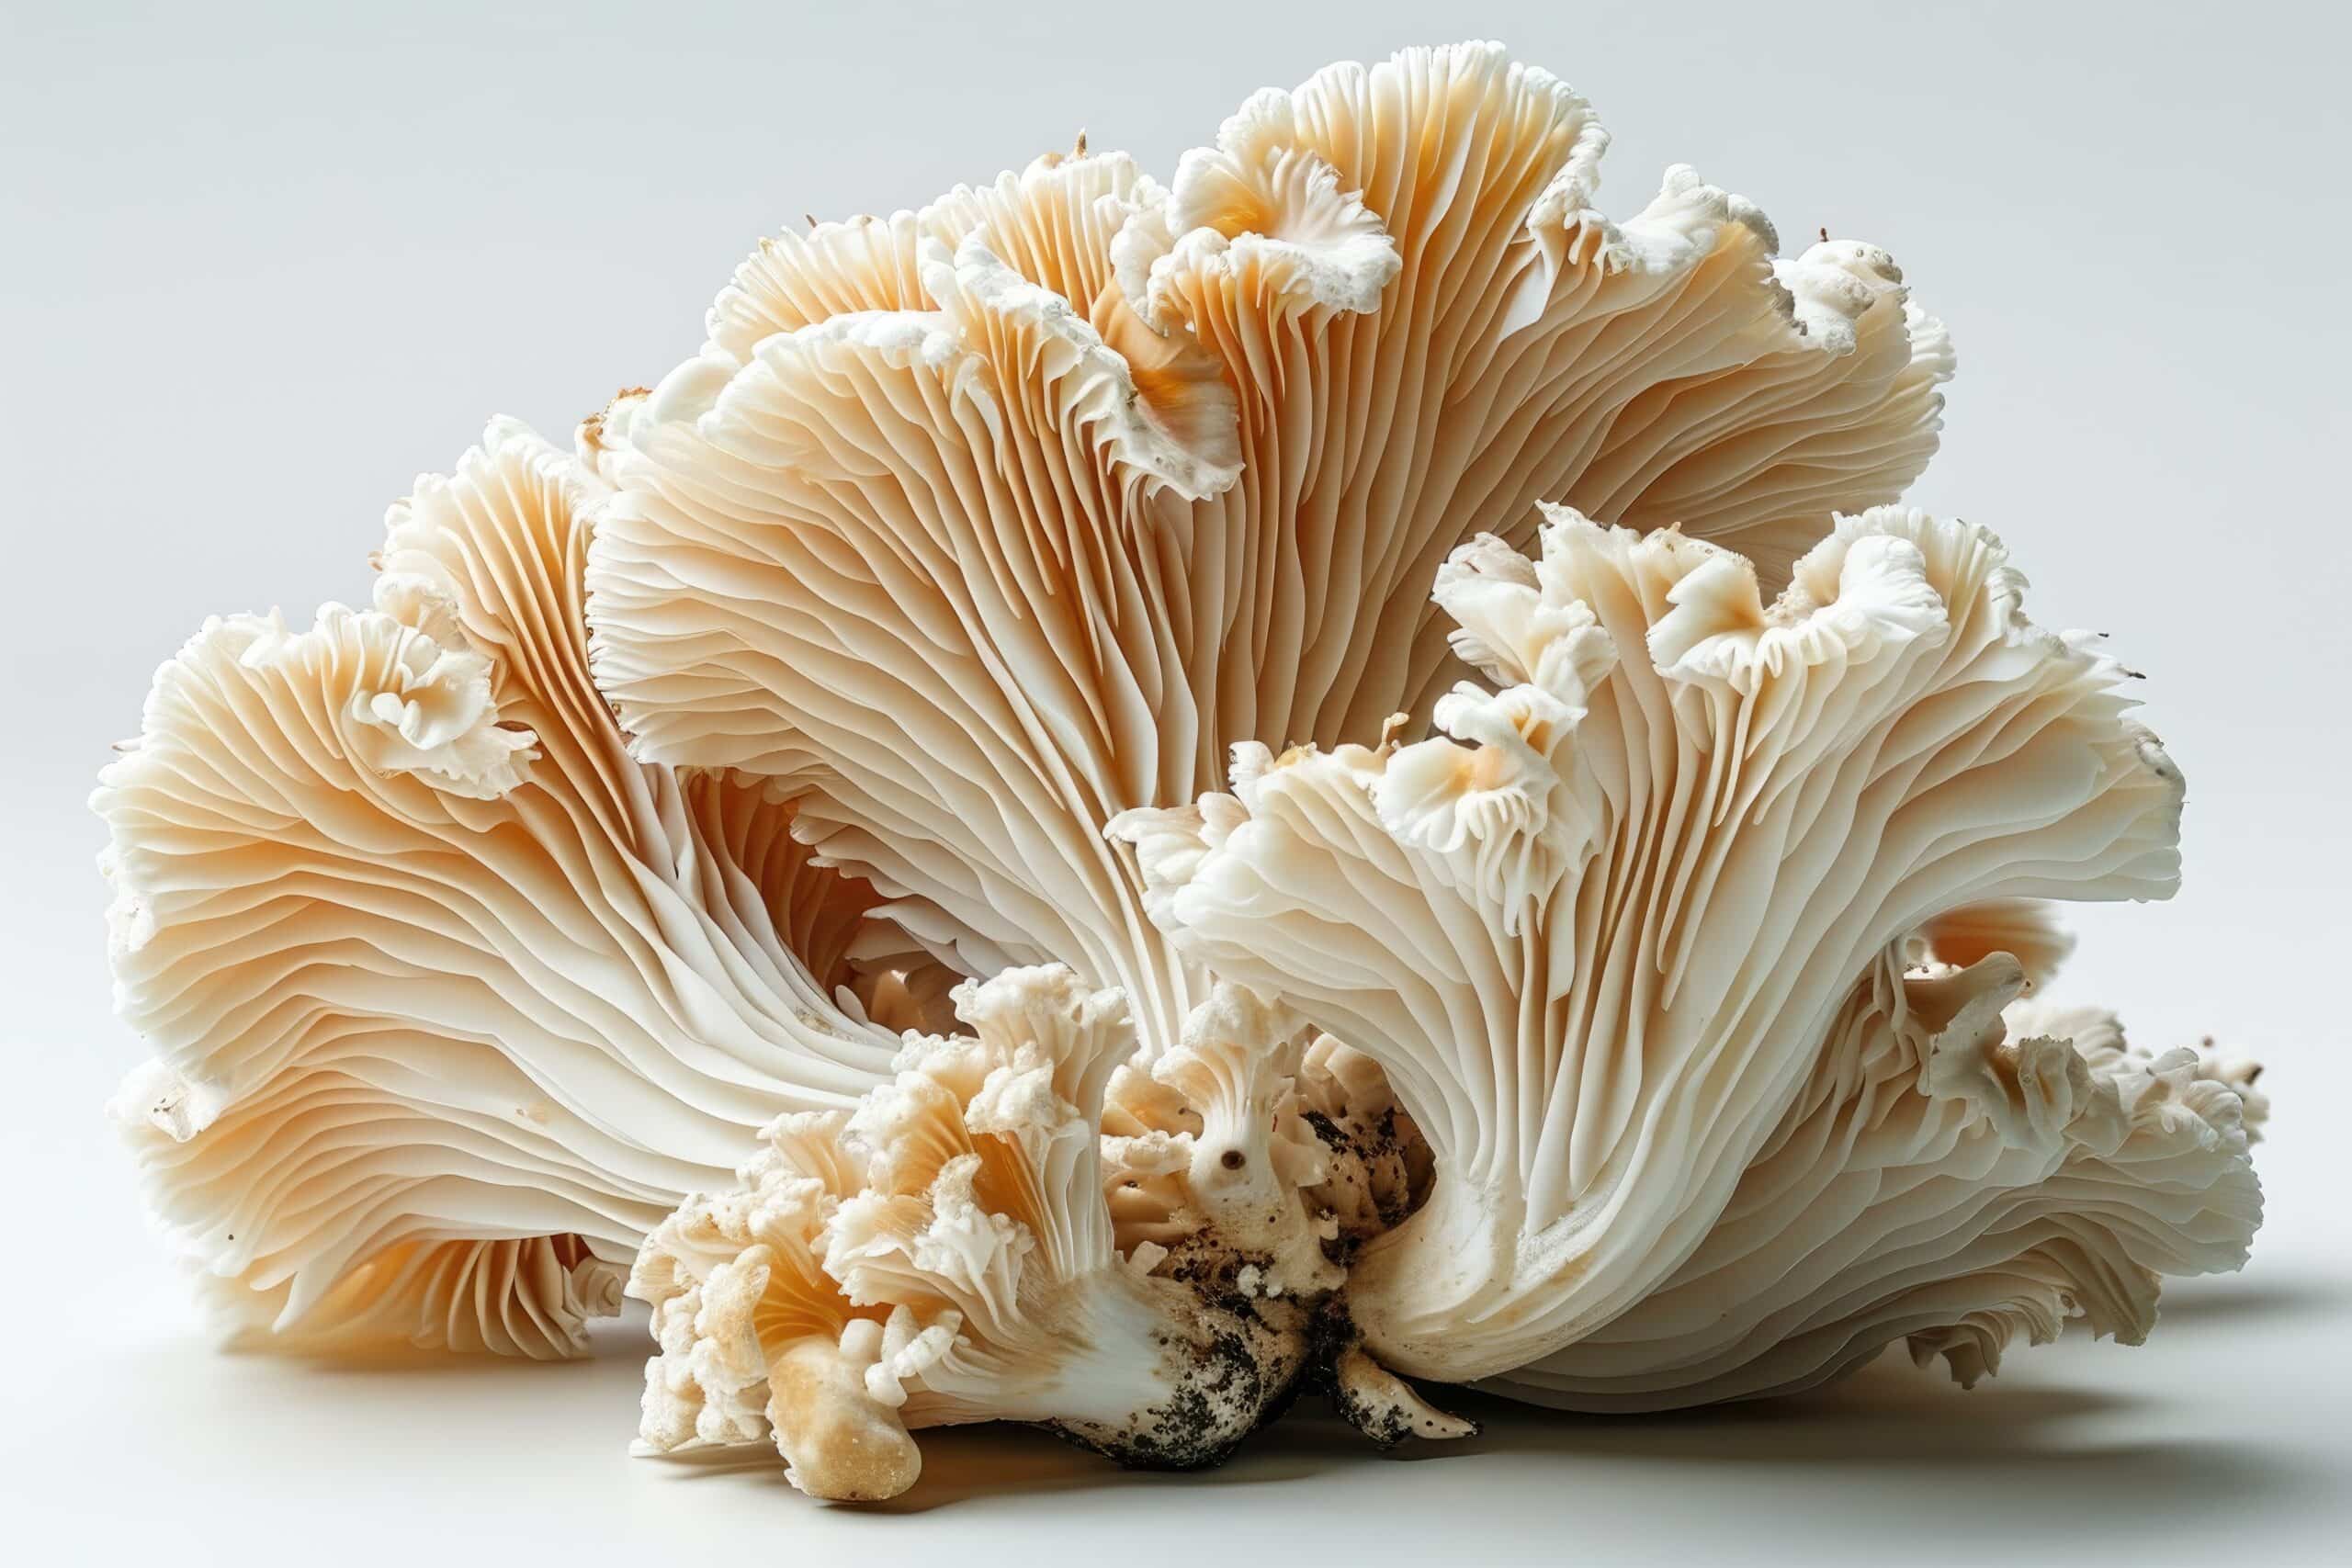 growmyownhealthfood.com : What conditions promote the growth of lion's mane mushrooms?